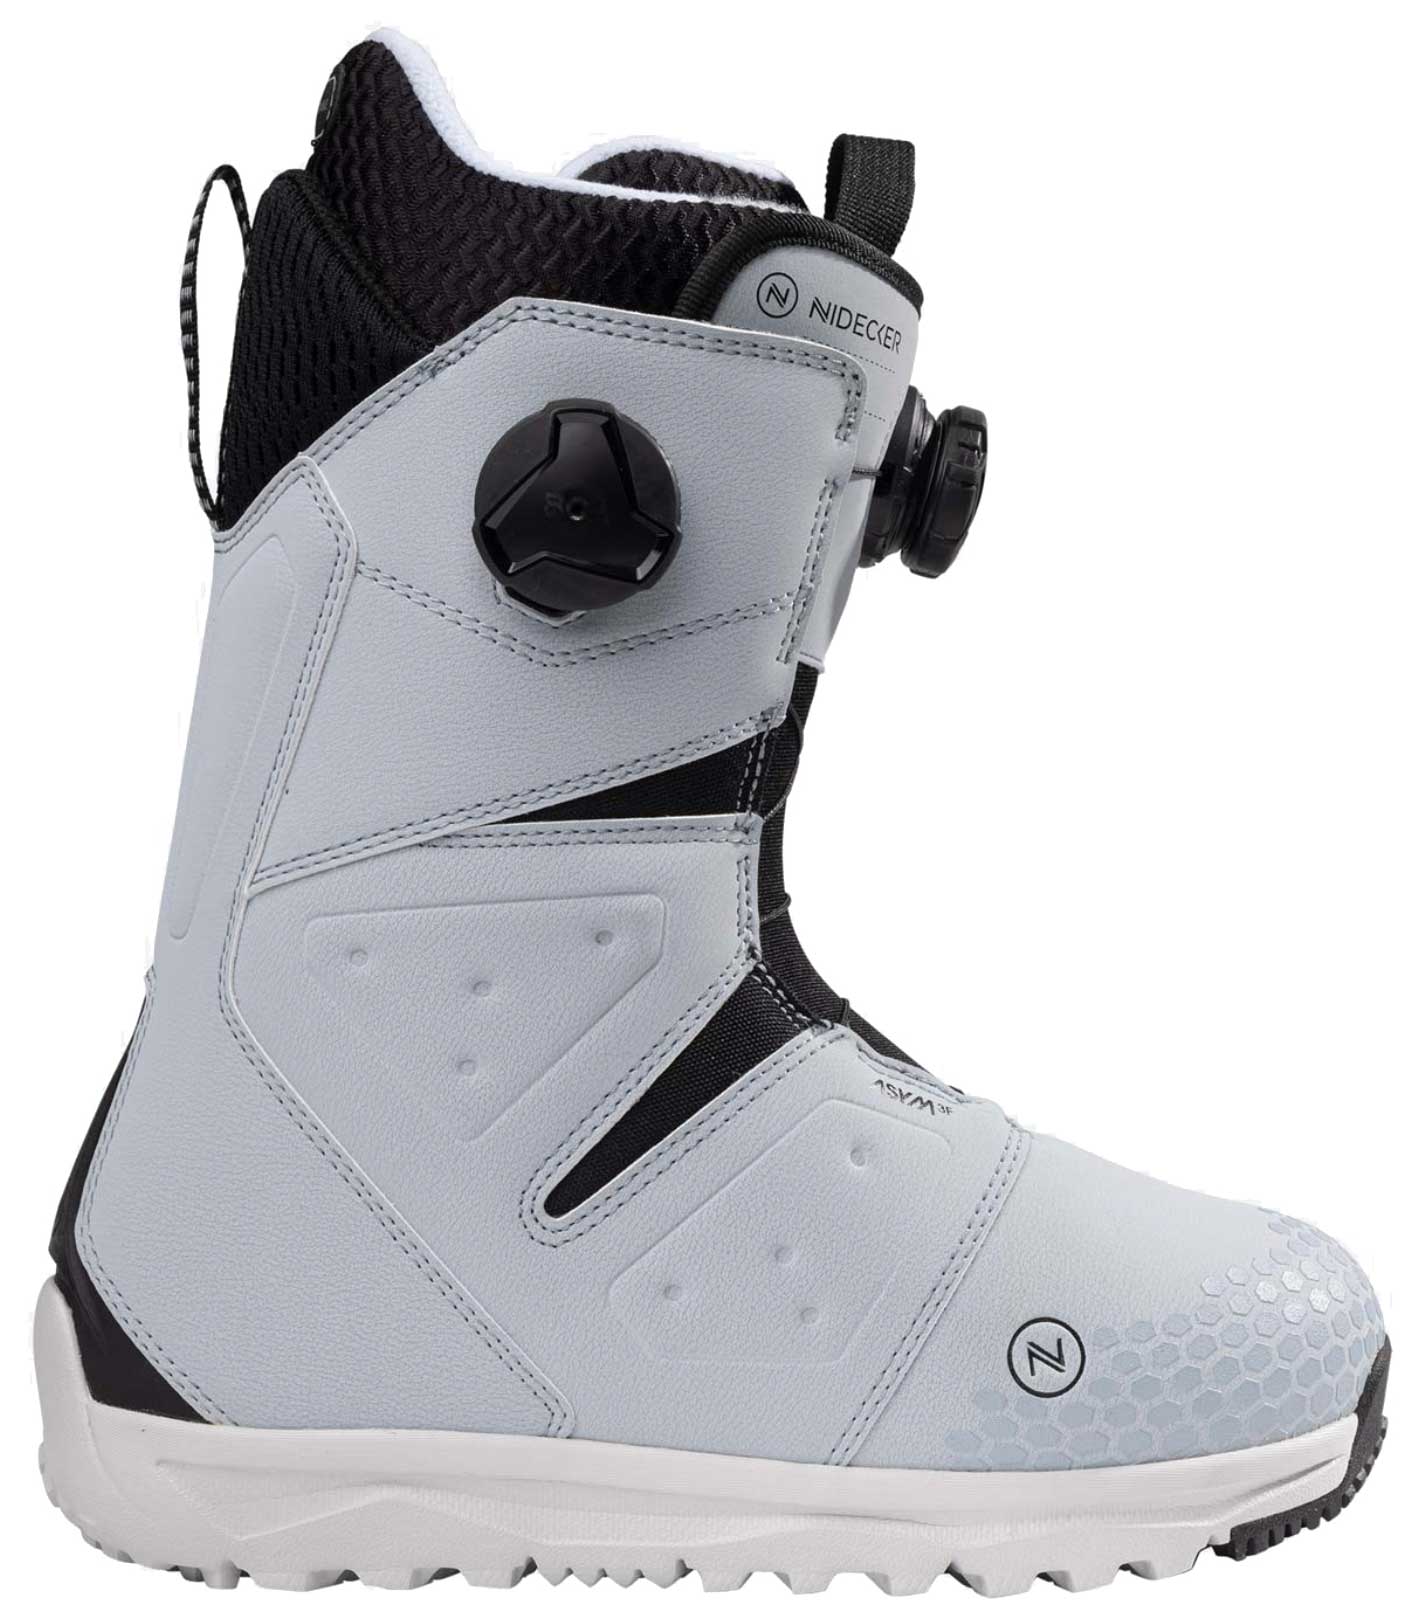 Nidecker Altai W 2023 Snowboard Boot Review